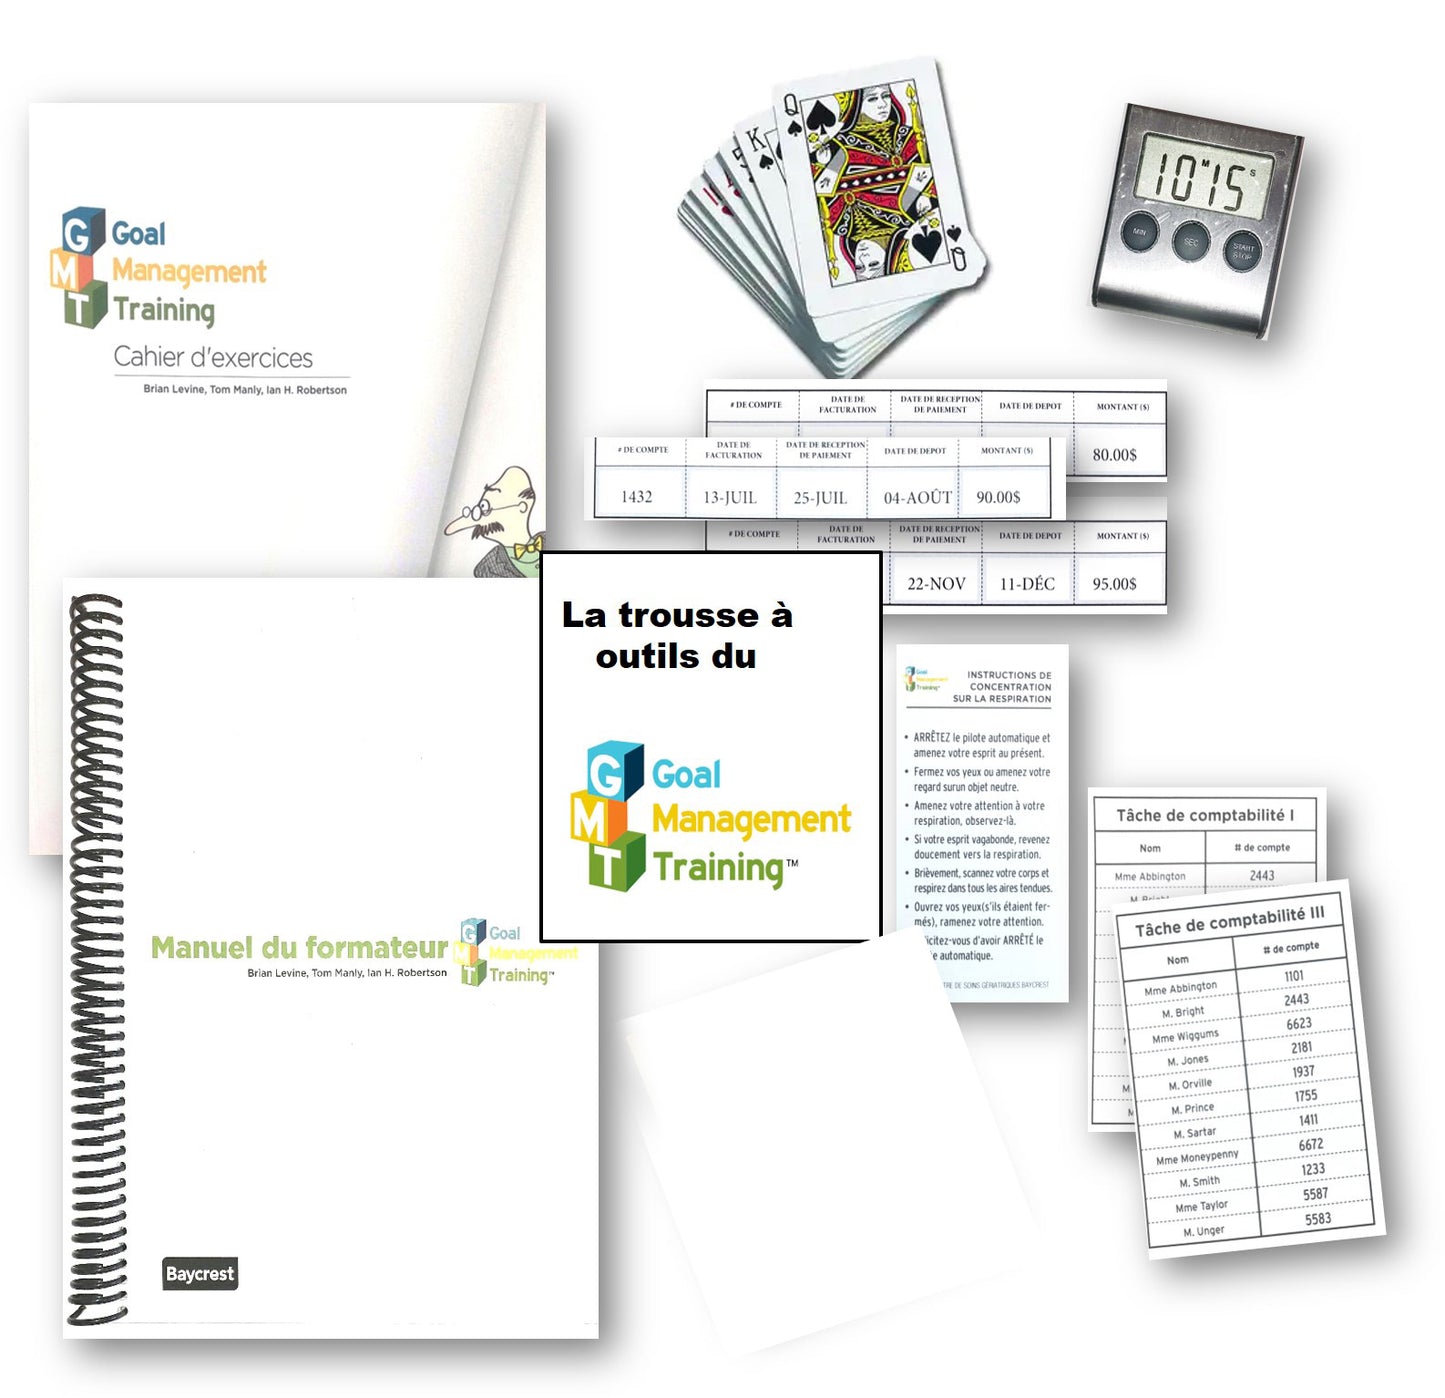 Goal Management Training™ toolkit (French)